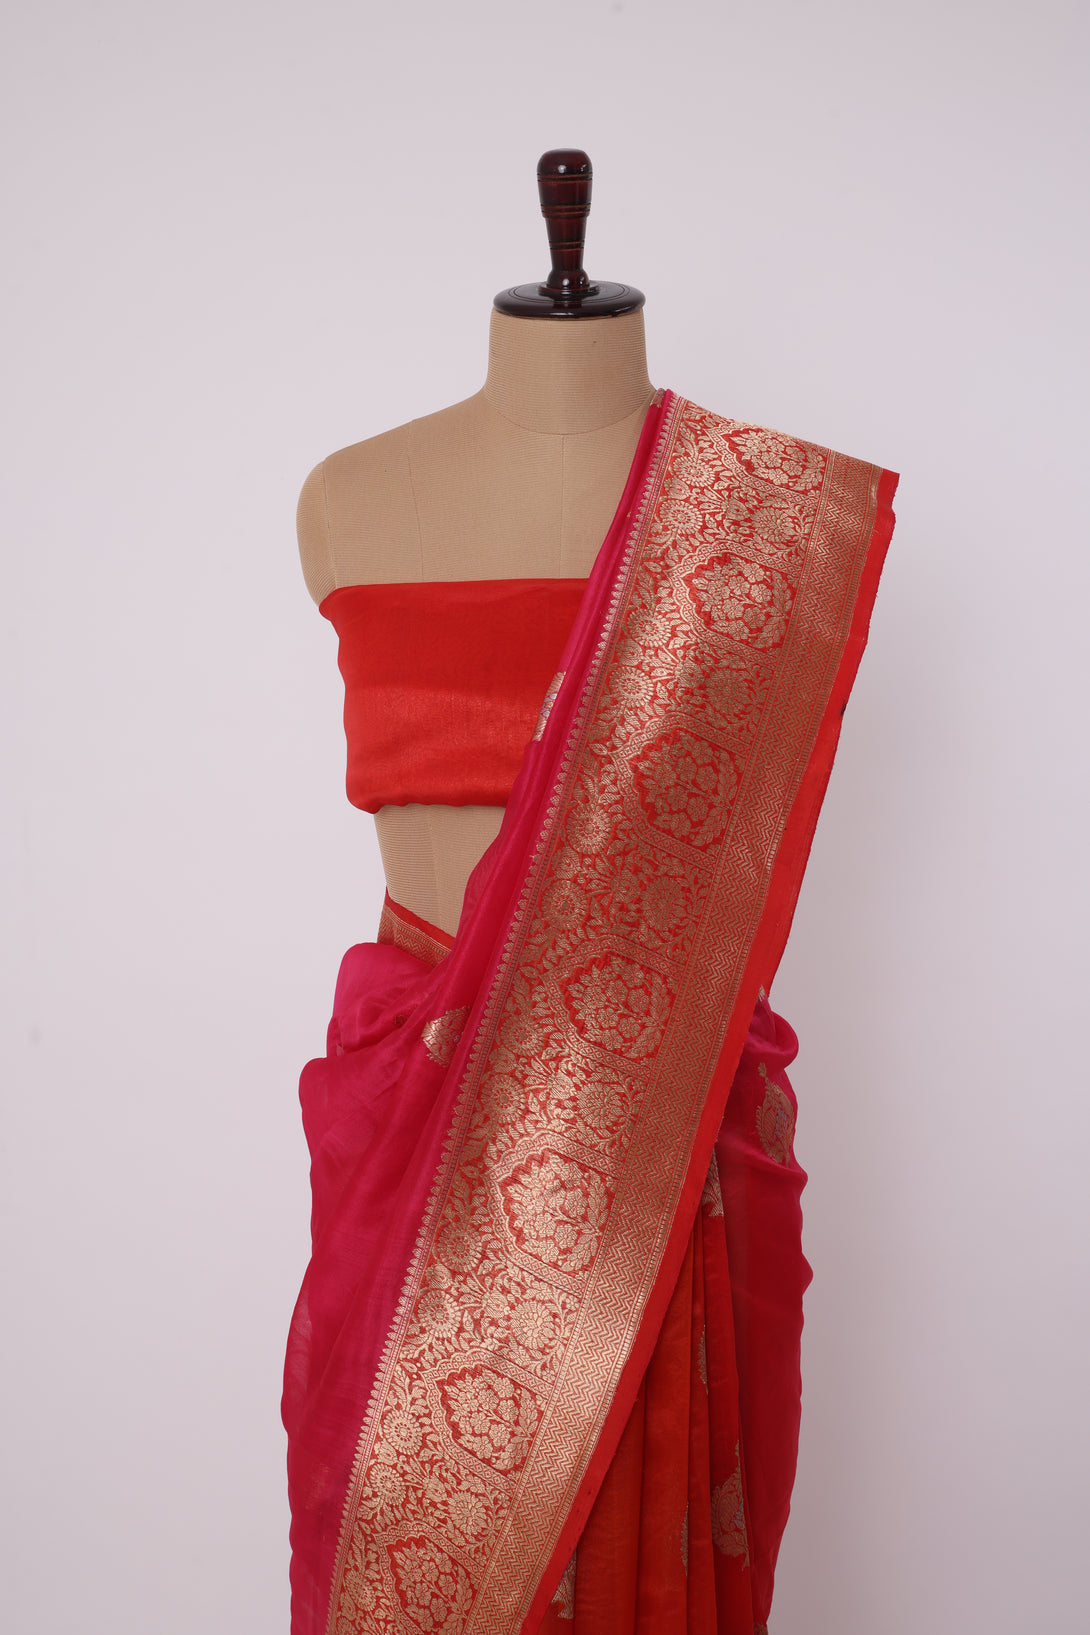 Crafted from high-quality Banarasi organza for graceful draping and comfort.